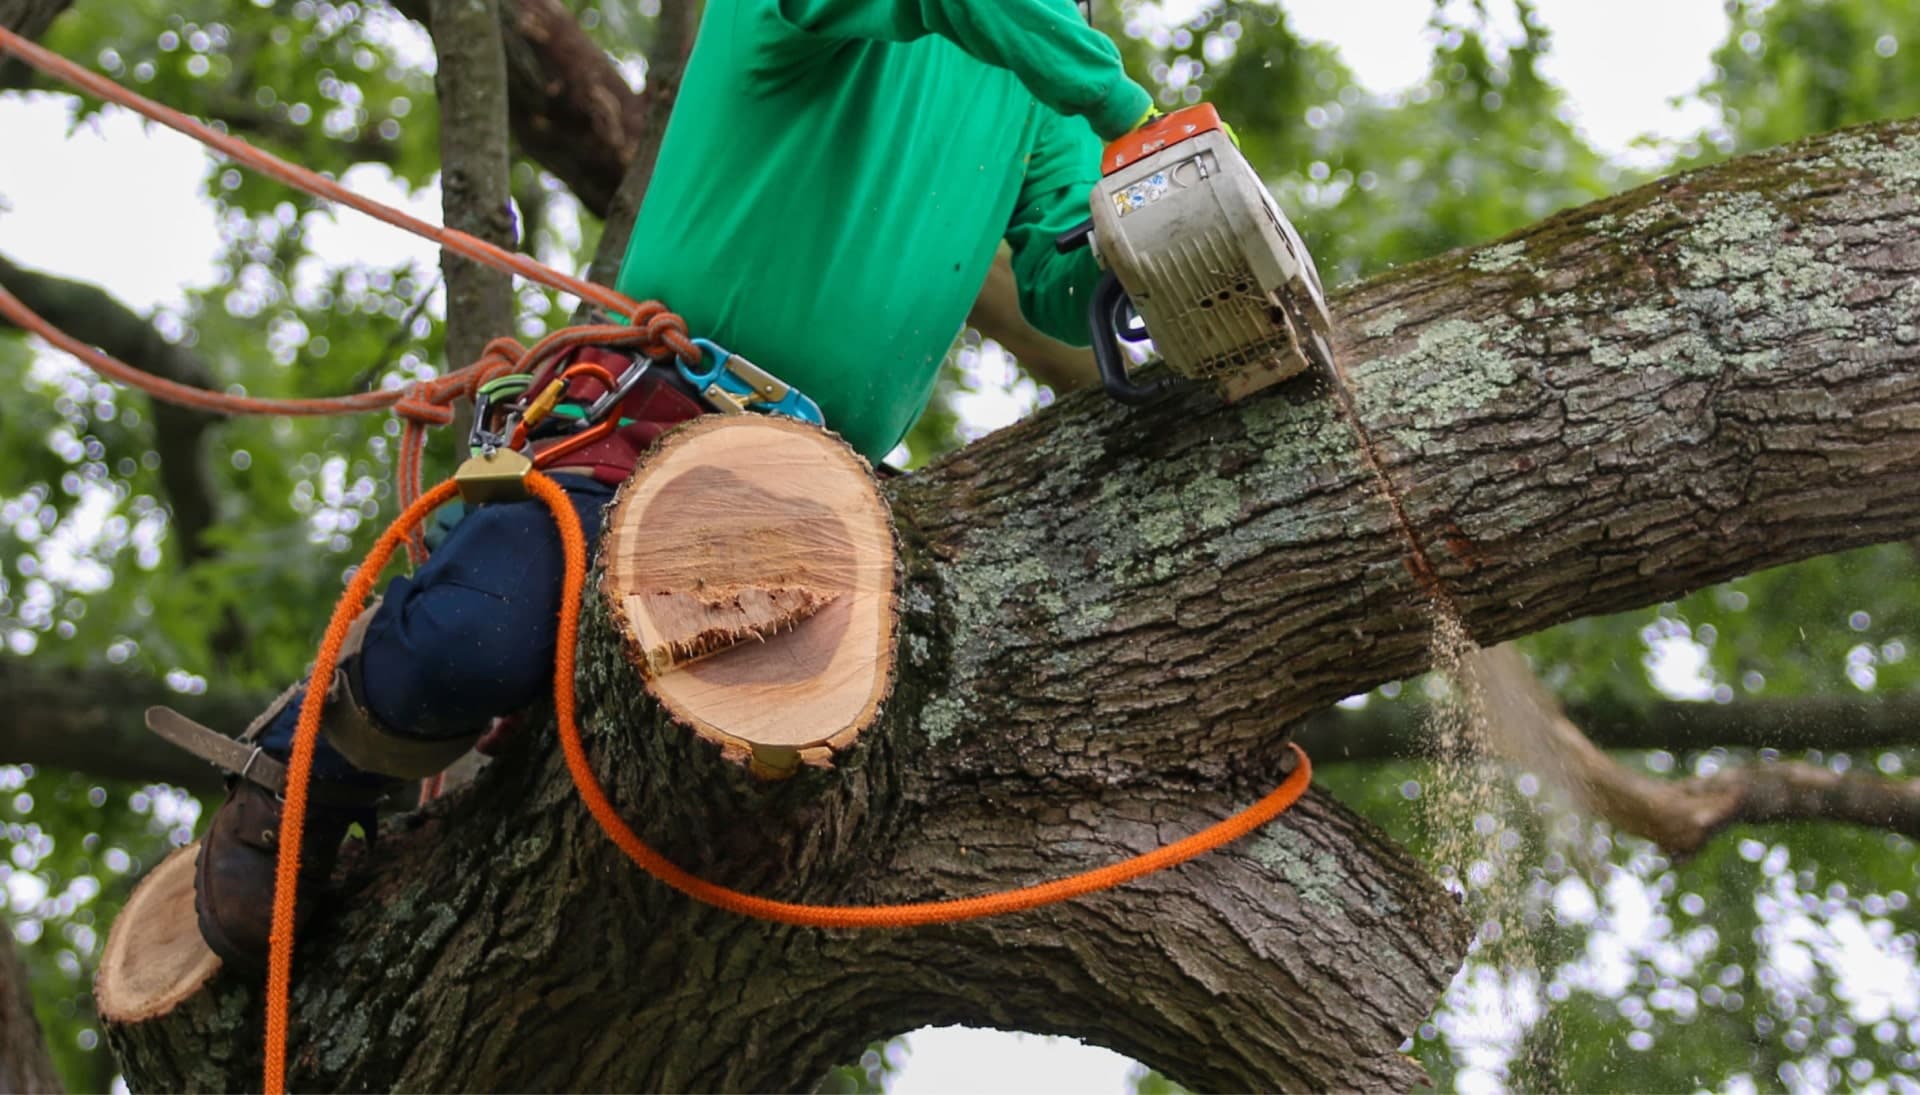 Shed your worries away with best tree removal in Murfreesboro